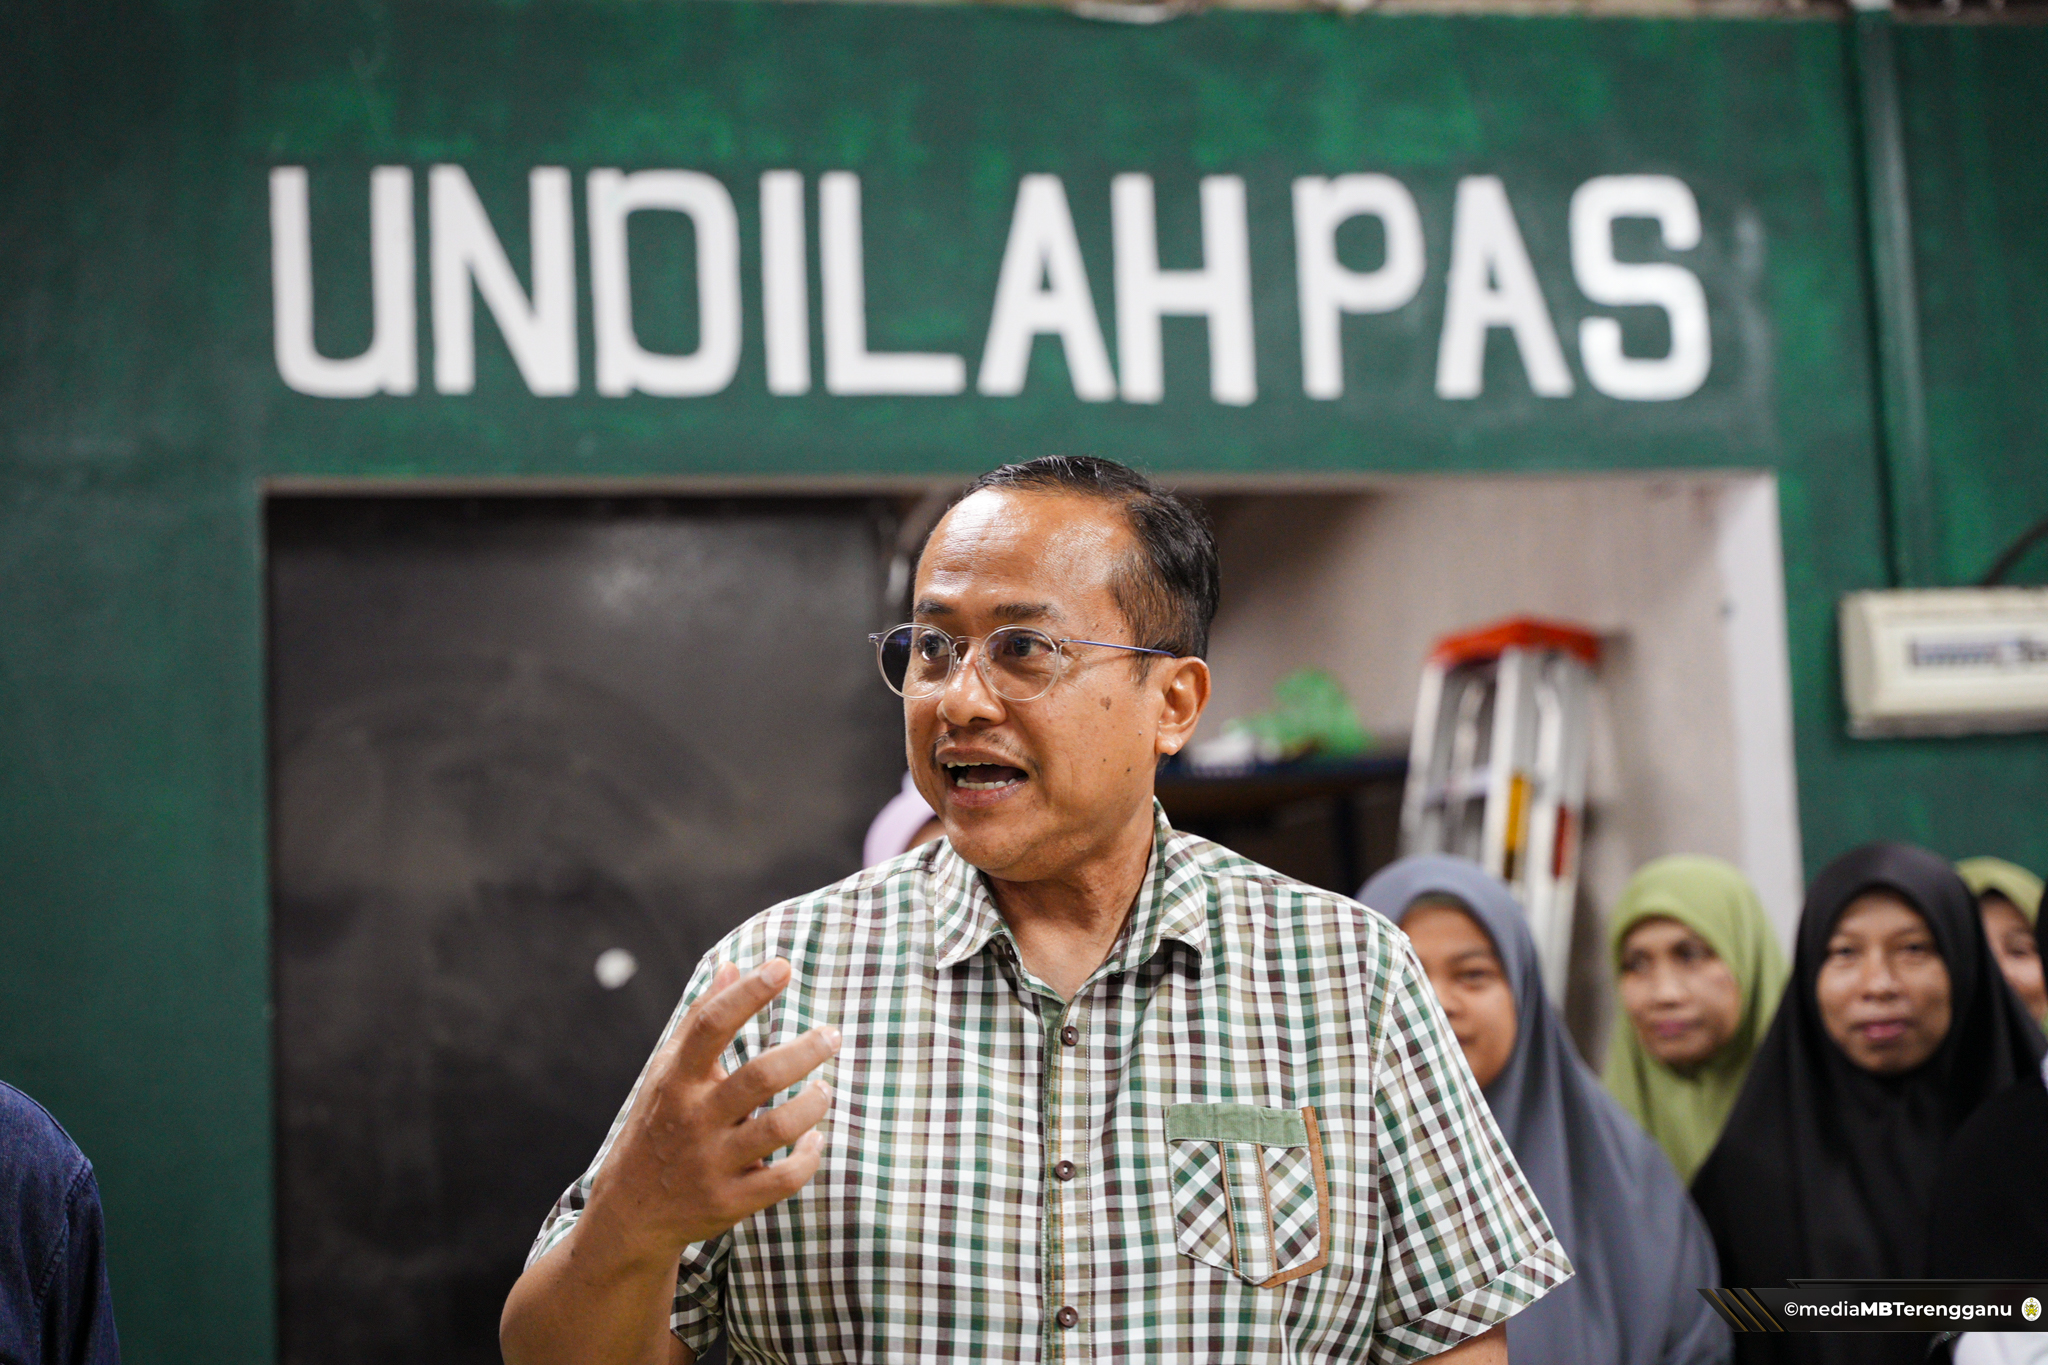 PAS fielding more non-ulama leaders to soften hard-line image, analyst says